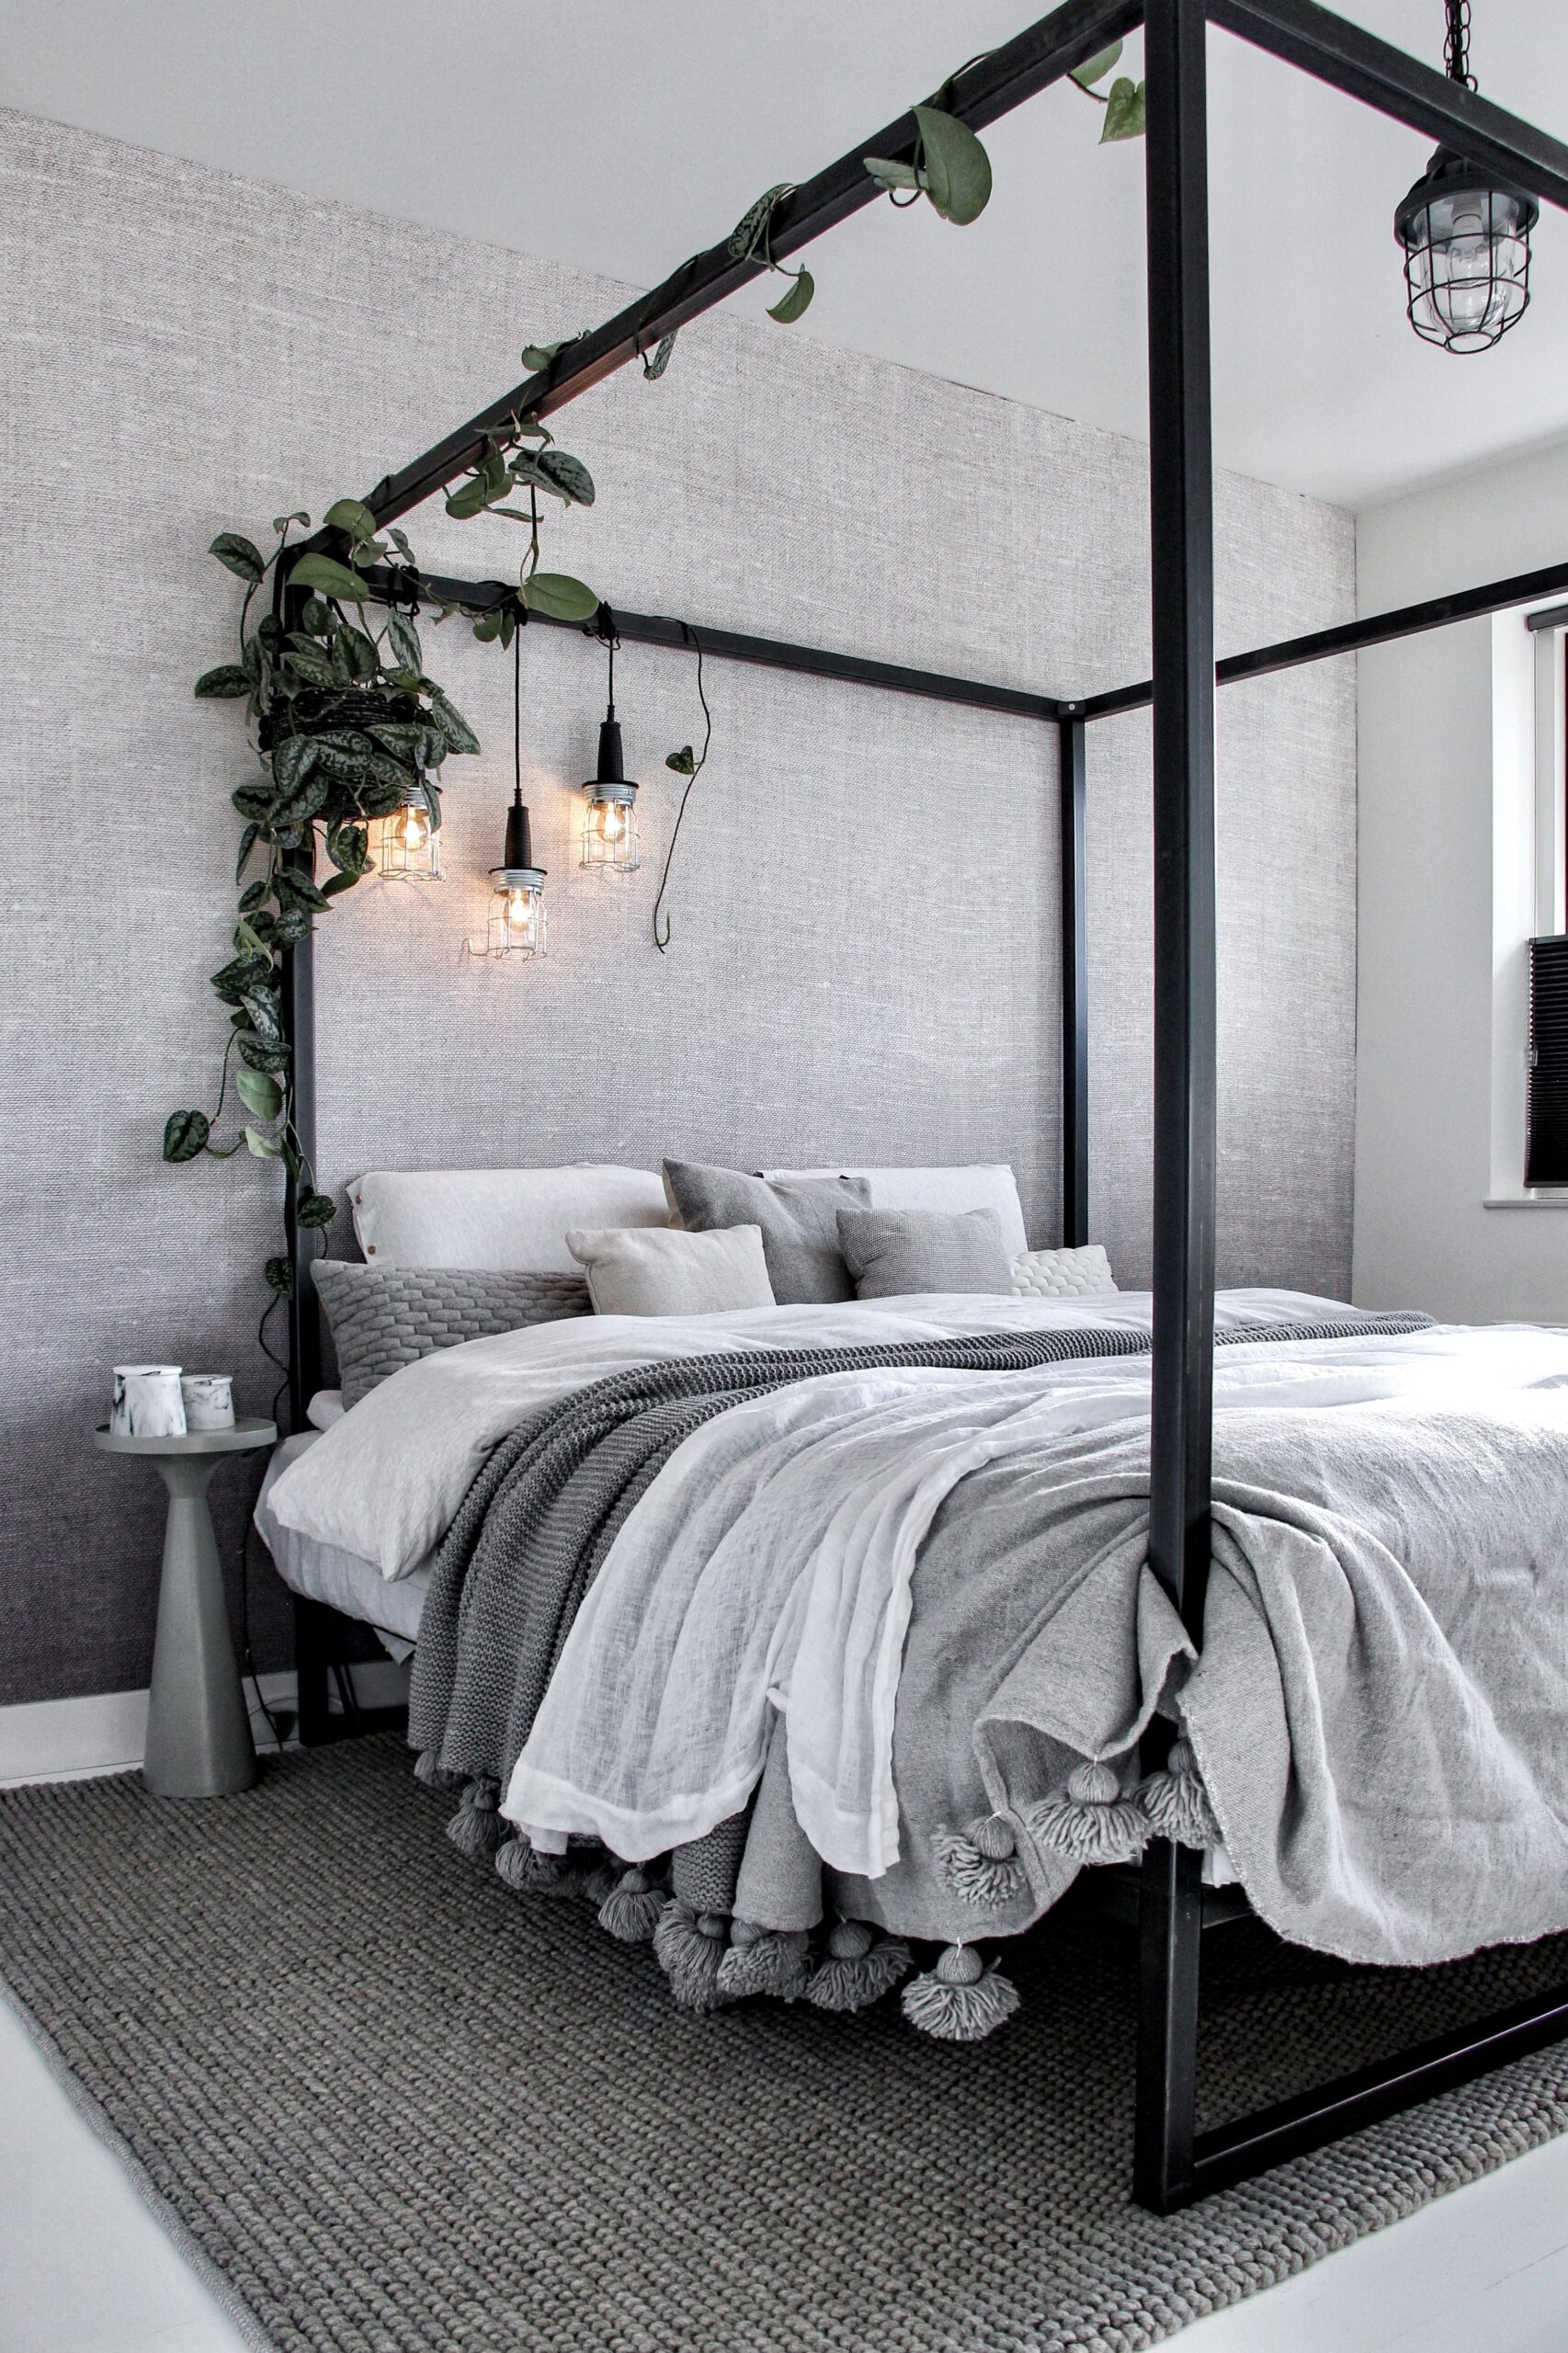 How to Select the Right Bedframe for Your
Space